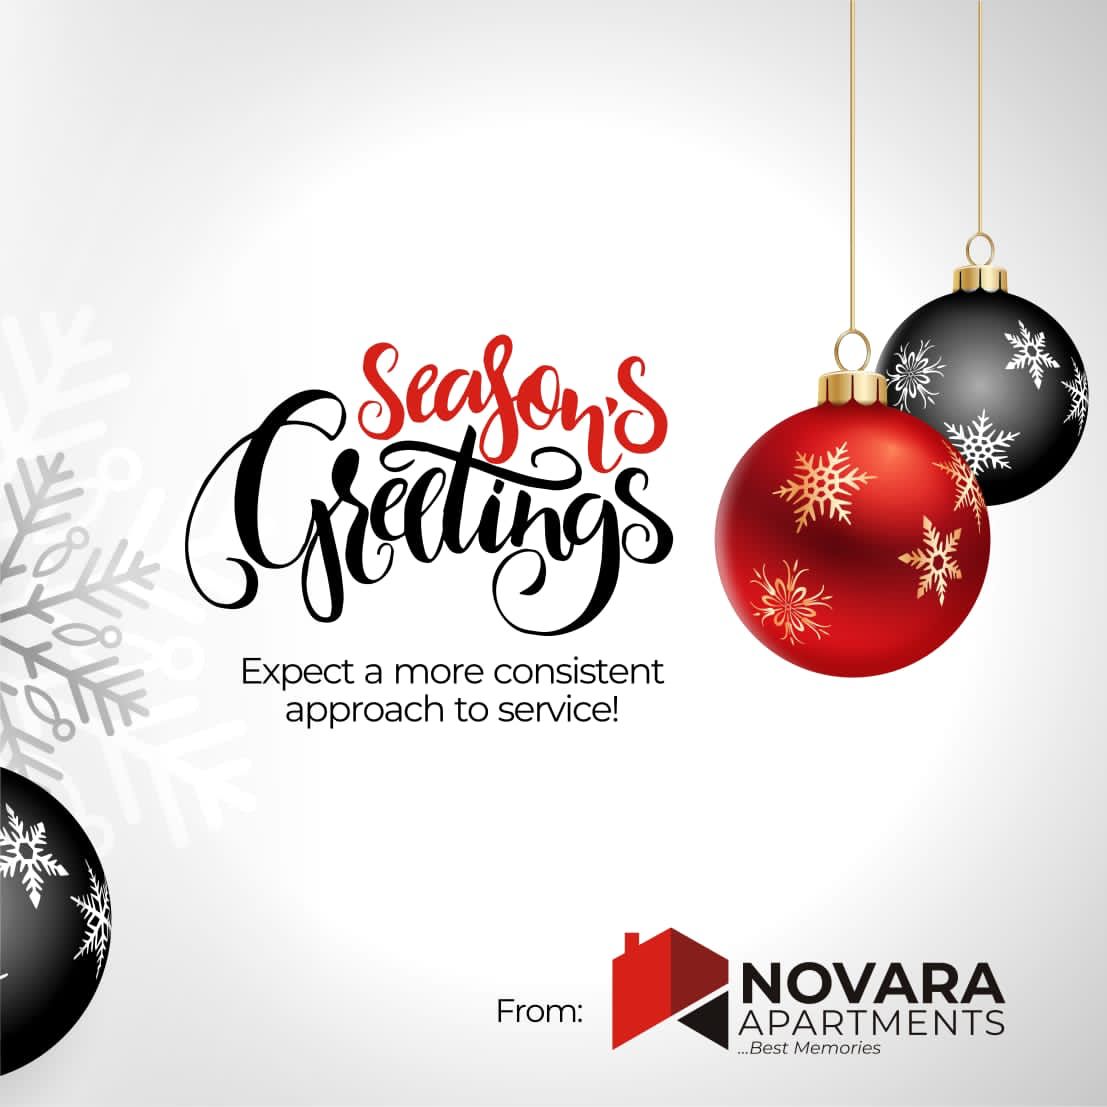 Well wishes from Novara Apartments. We have more to unravel this year for you and yours.

For enquiries or reservations, call or send a WhatsApp message on +2349090376041

#getaway #weekendgetaway #holidaygetaway #holidays #businesslodge #enjoy #enjoylife #nigeria #lagos #lekki